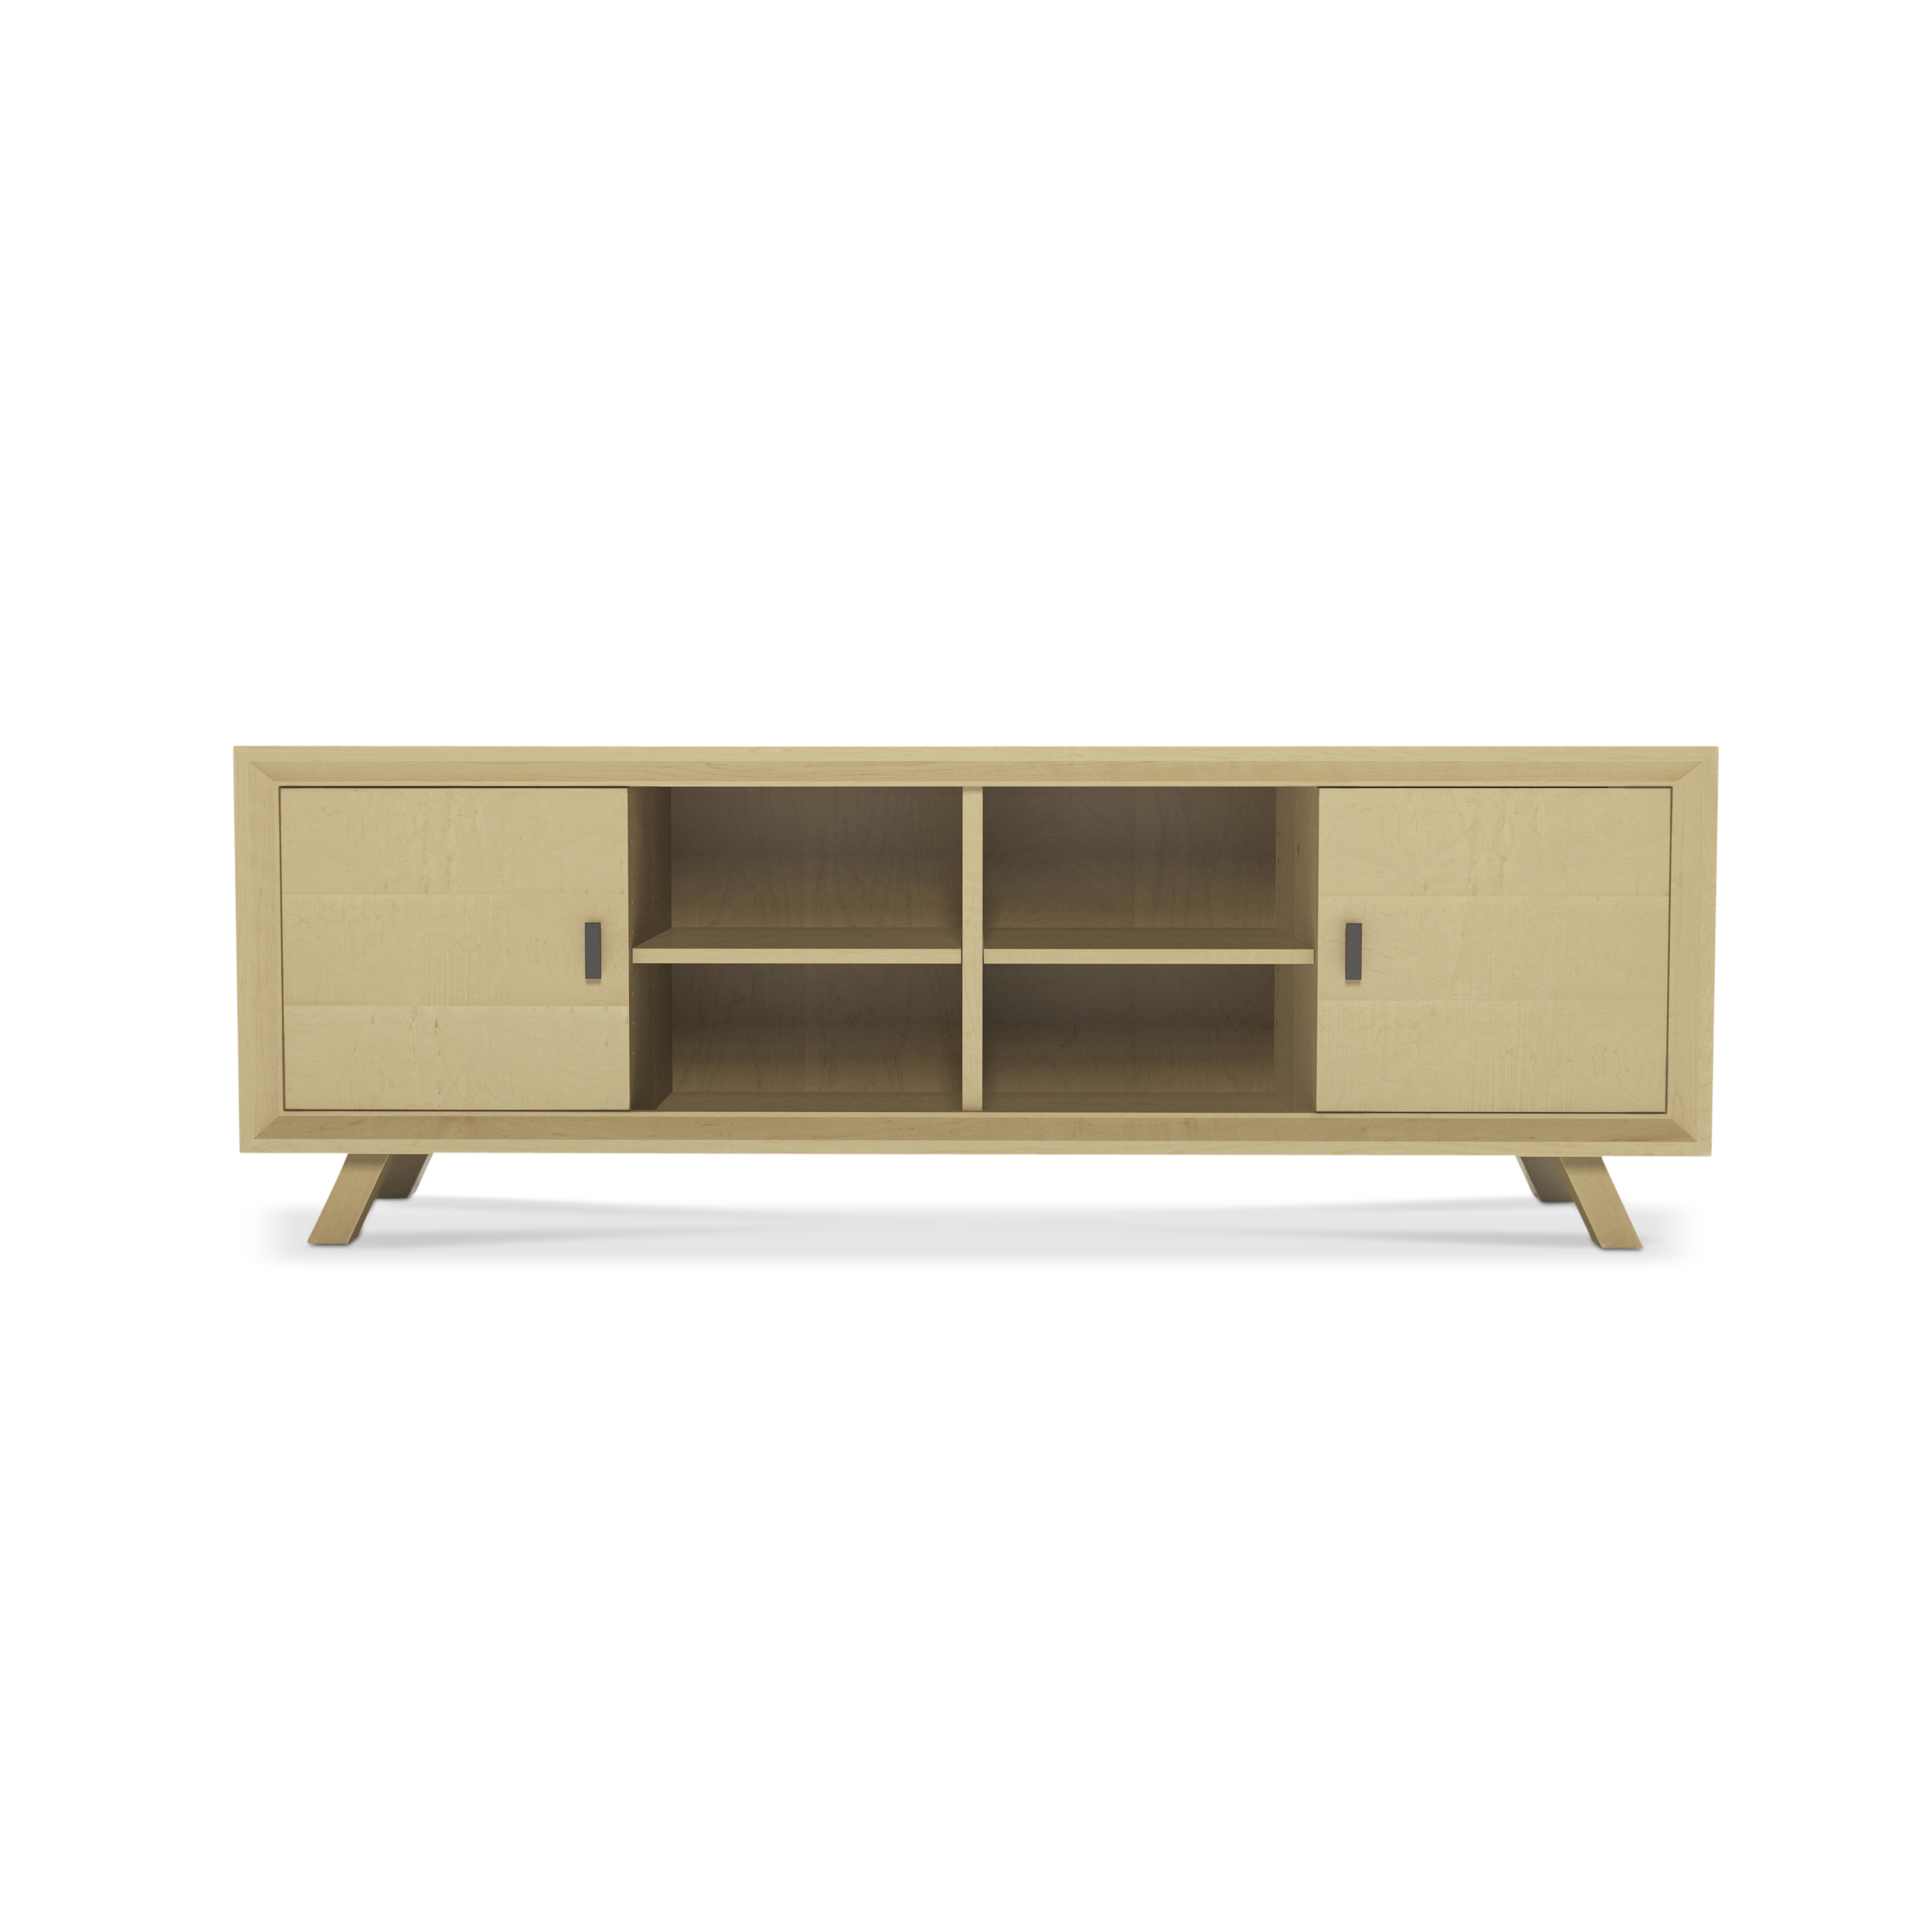 Series 555 Media Console With Two Doors At 72″ In Width